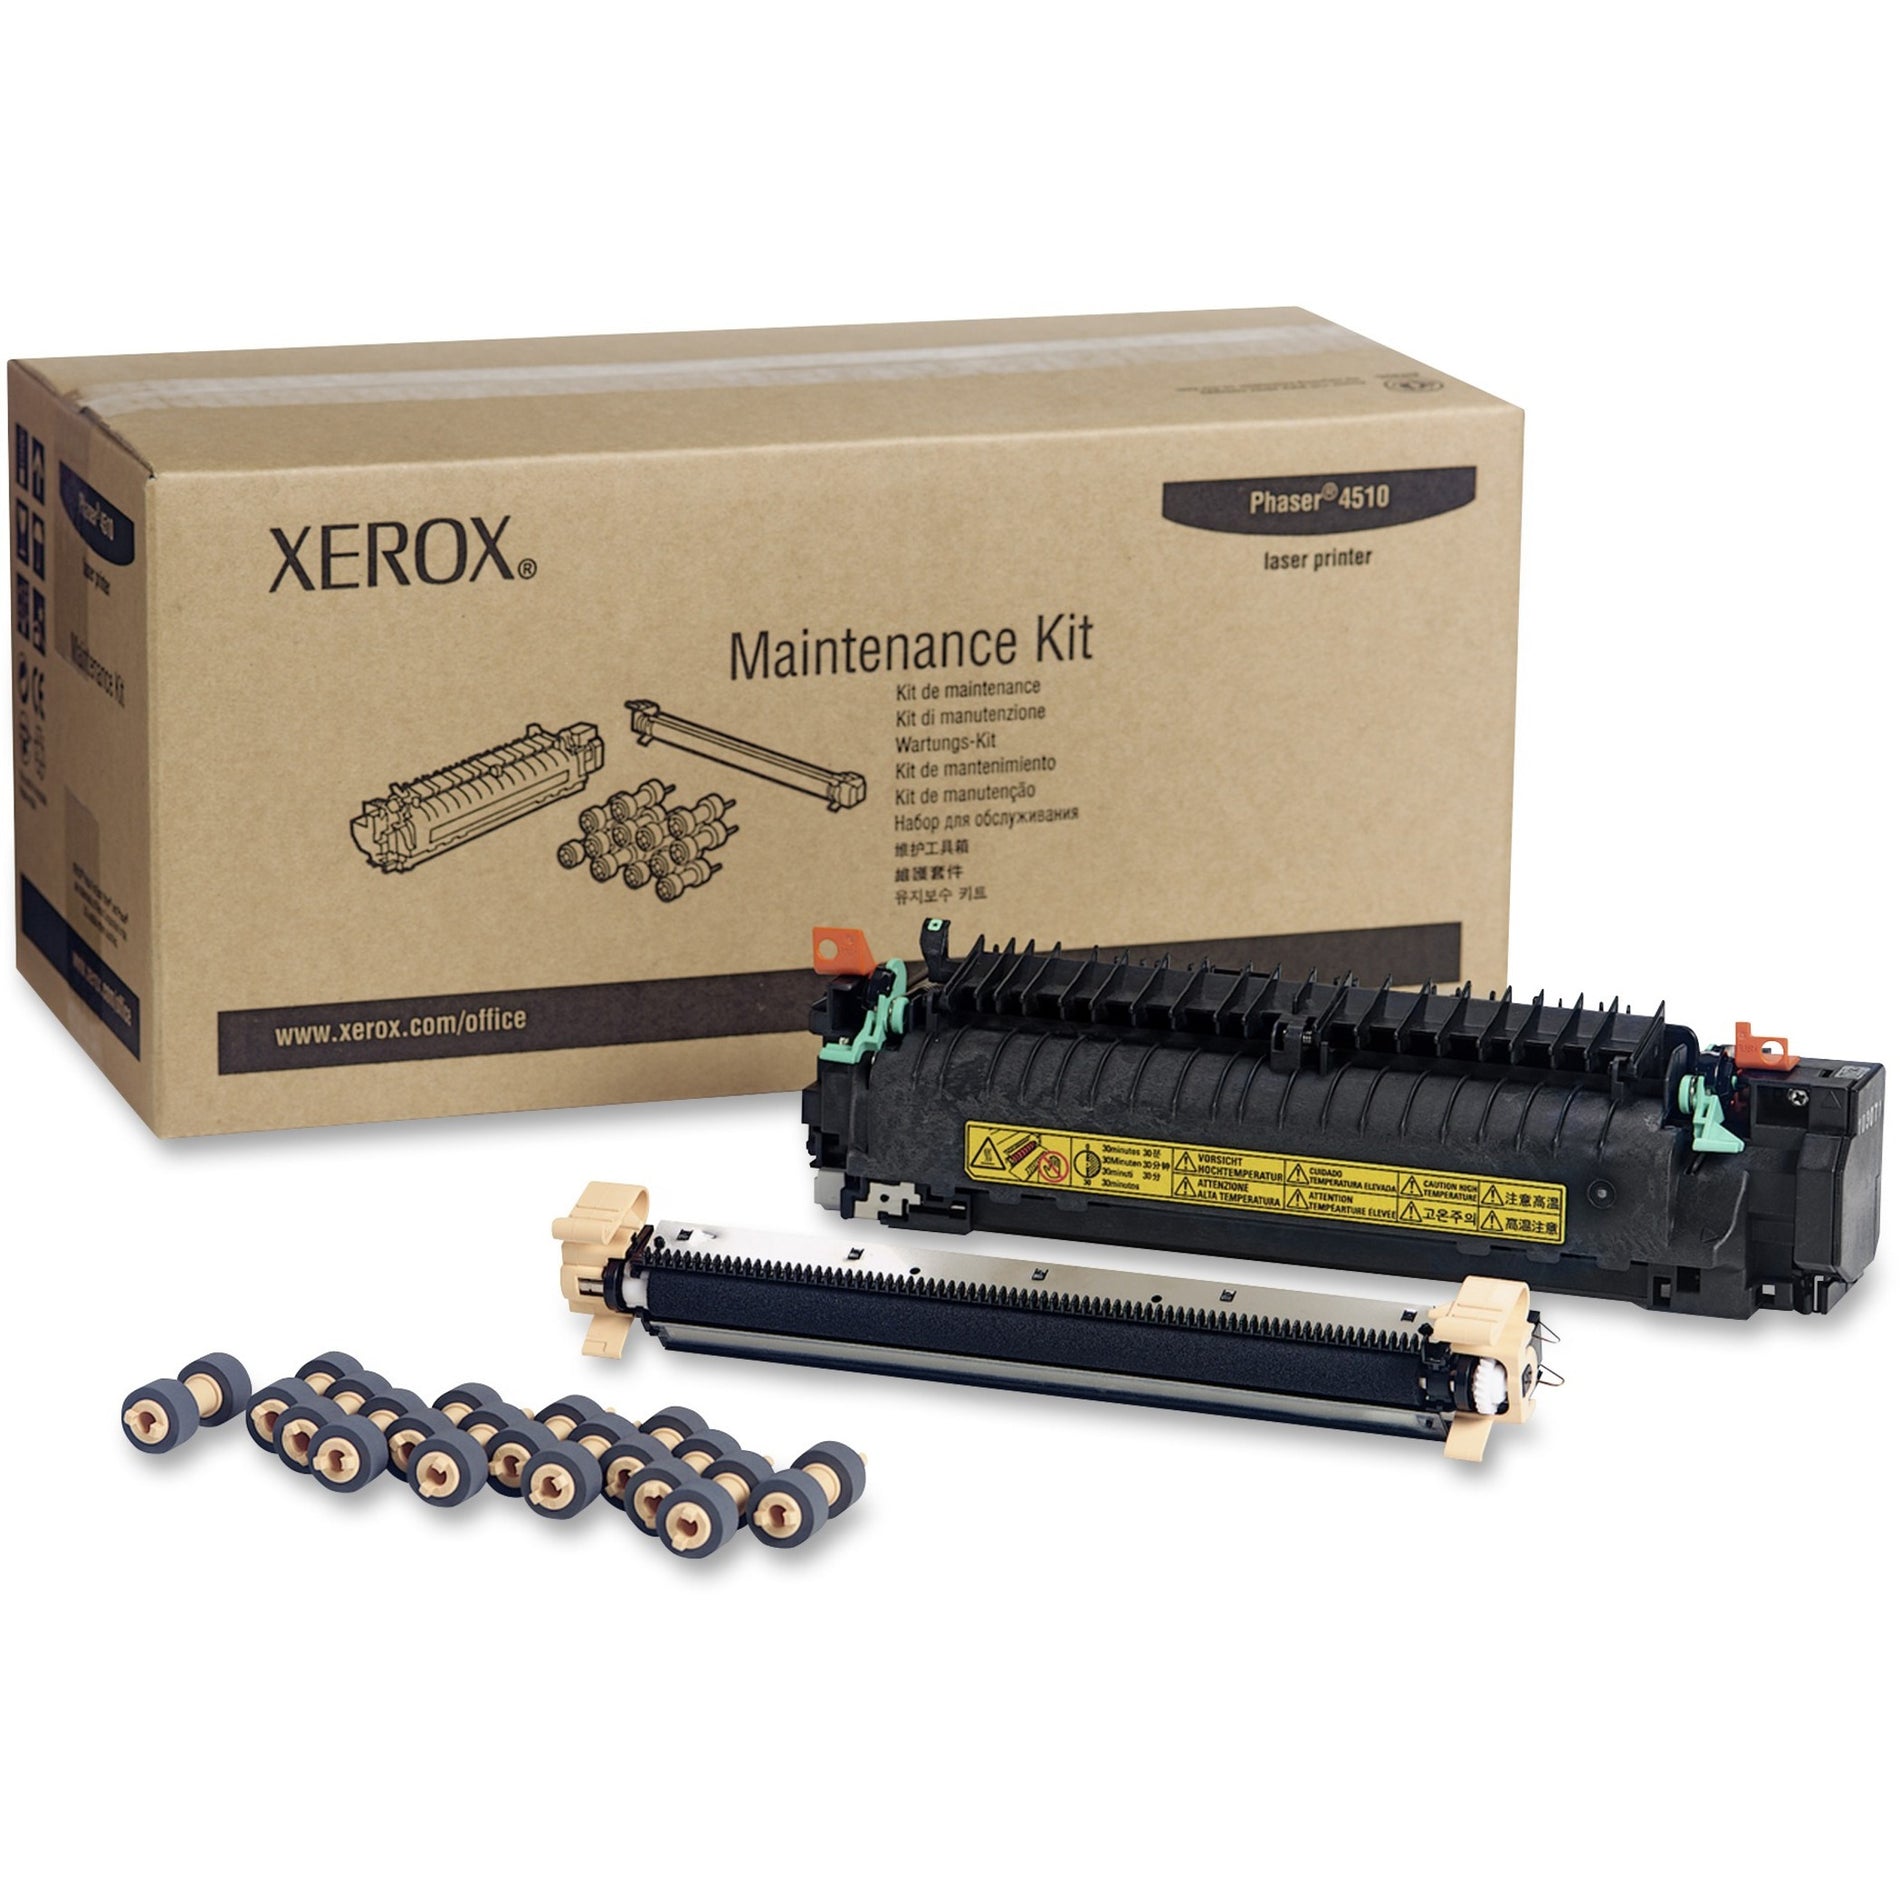 Xerox 108R00717 Phaser 4510 Maintenance Kit, 200000 Pages Yield